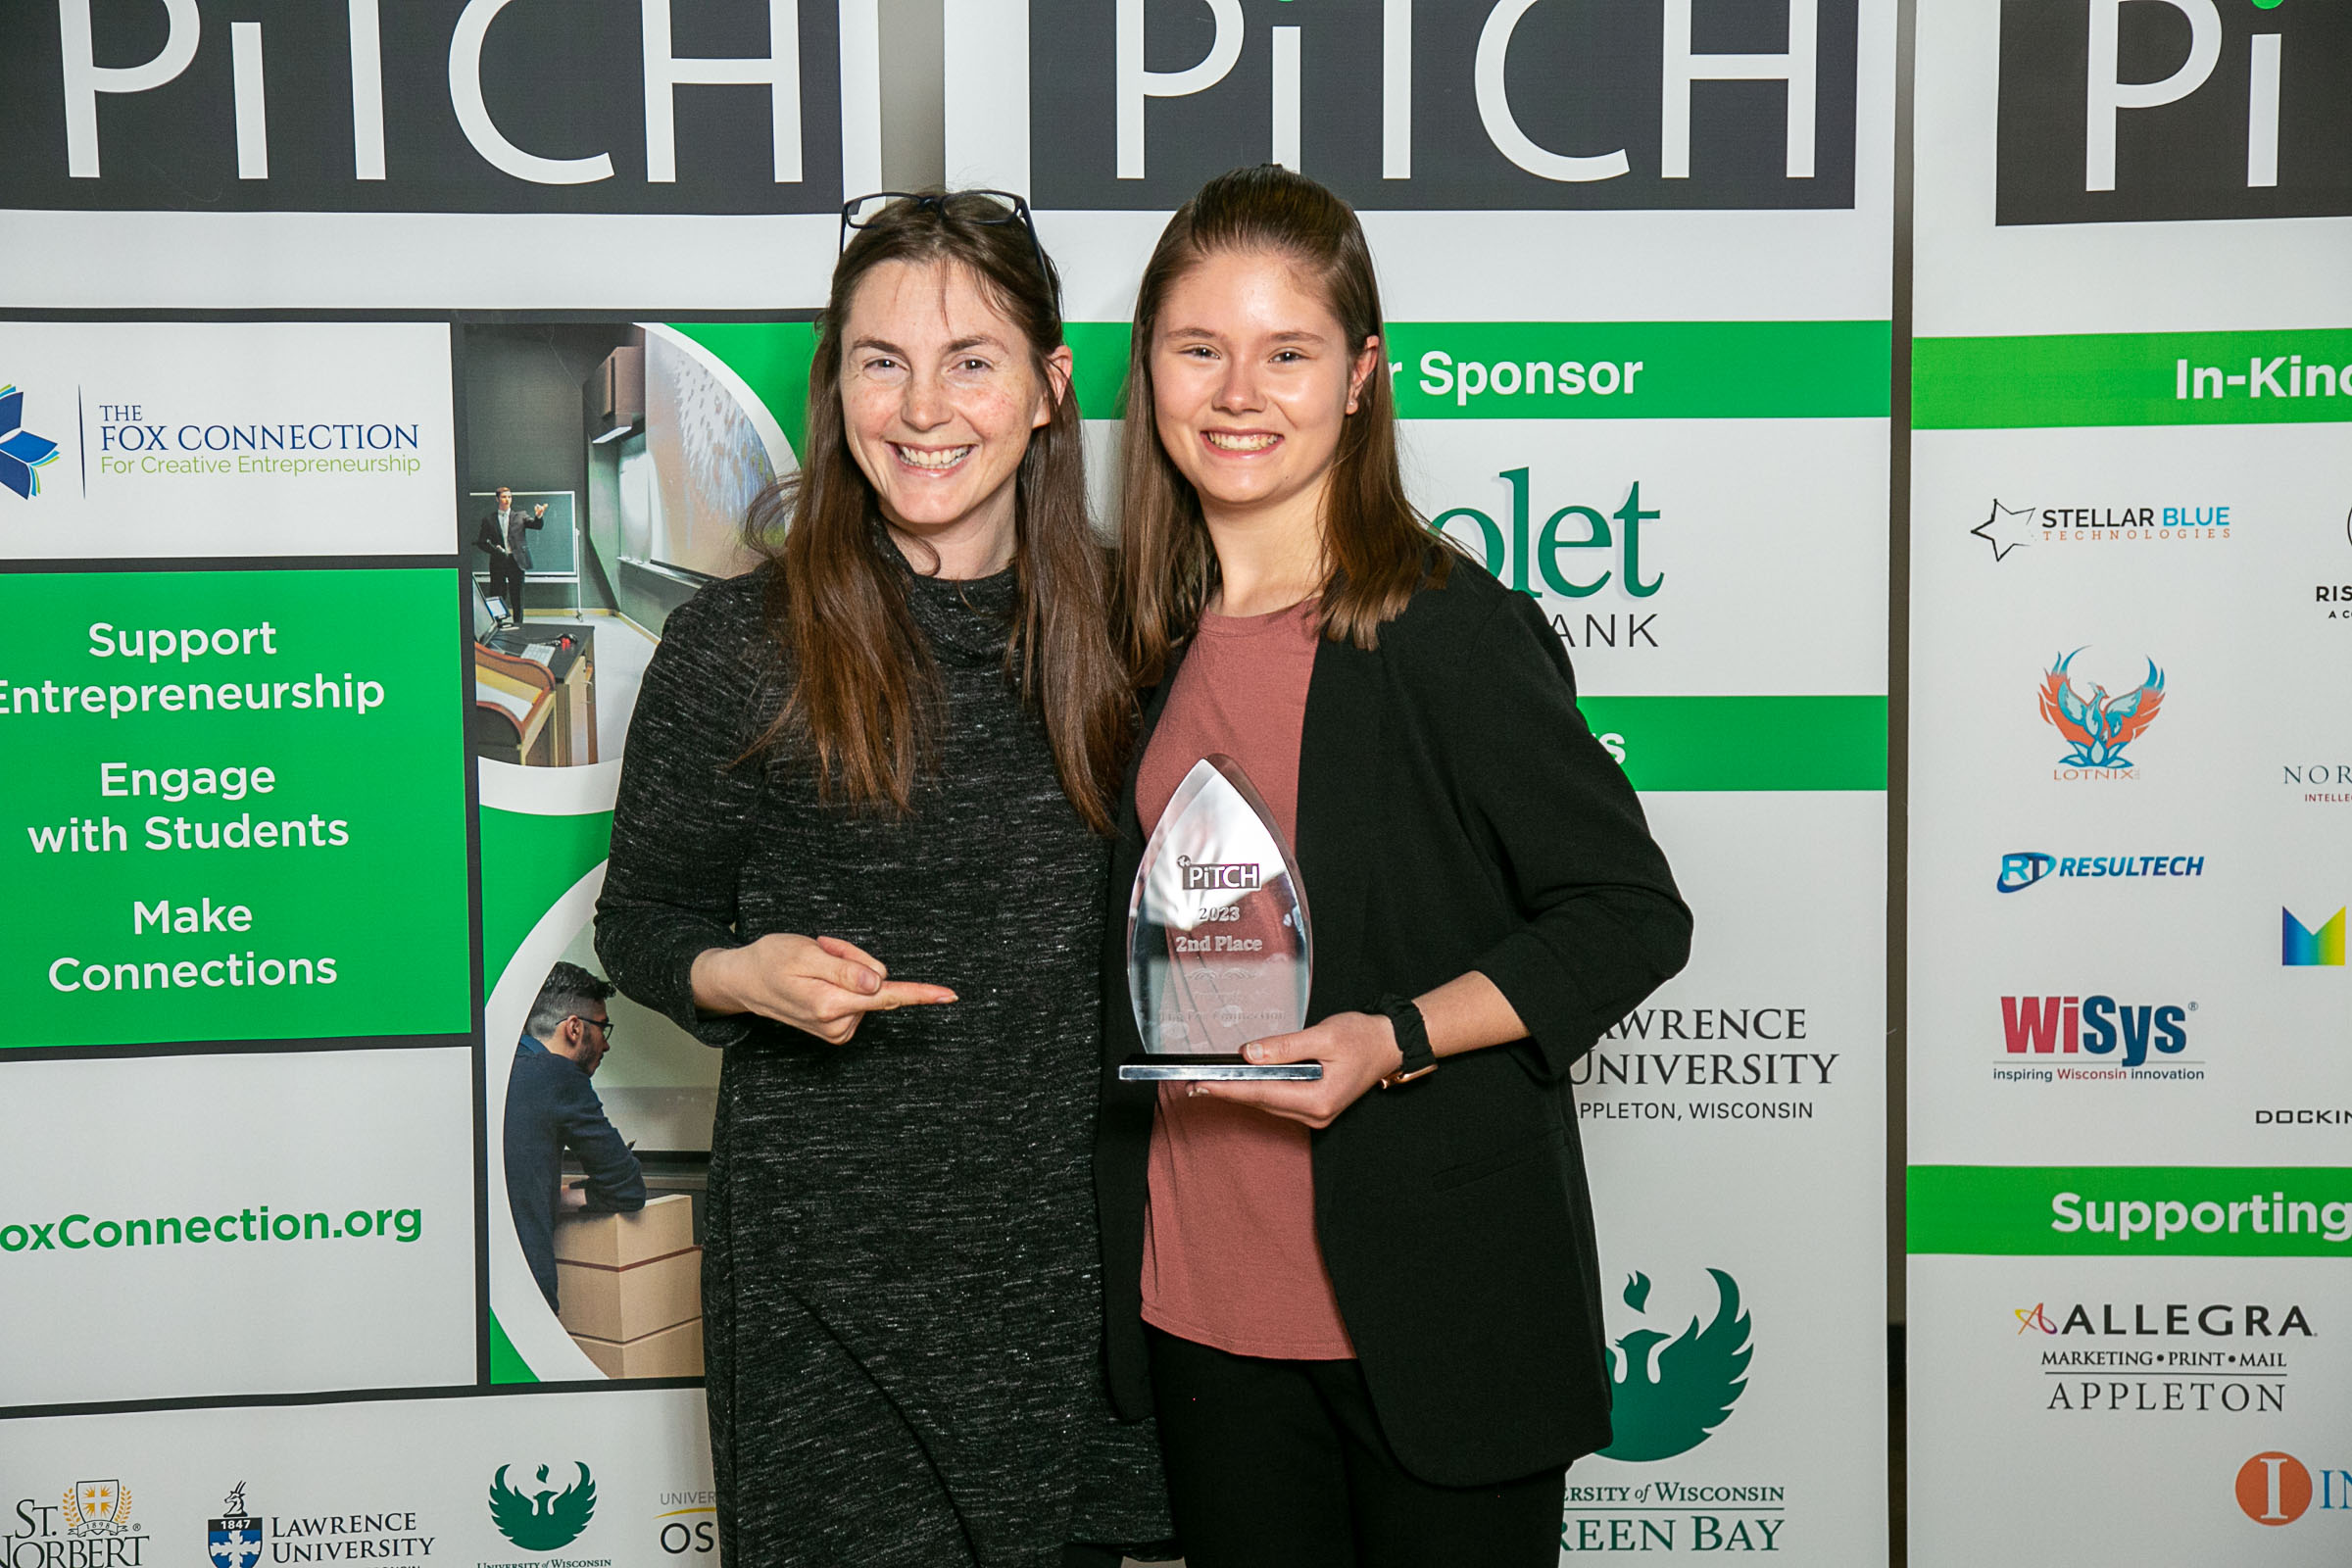 Young Lakeland entrepreneur turns heads at Pitch competition